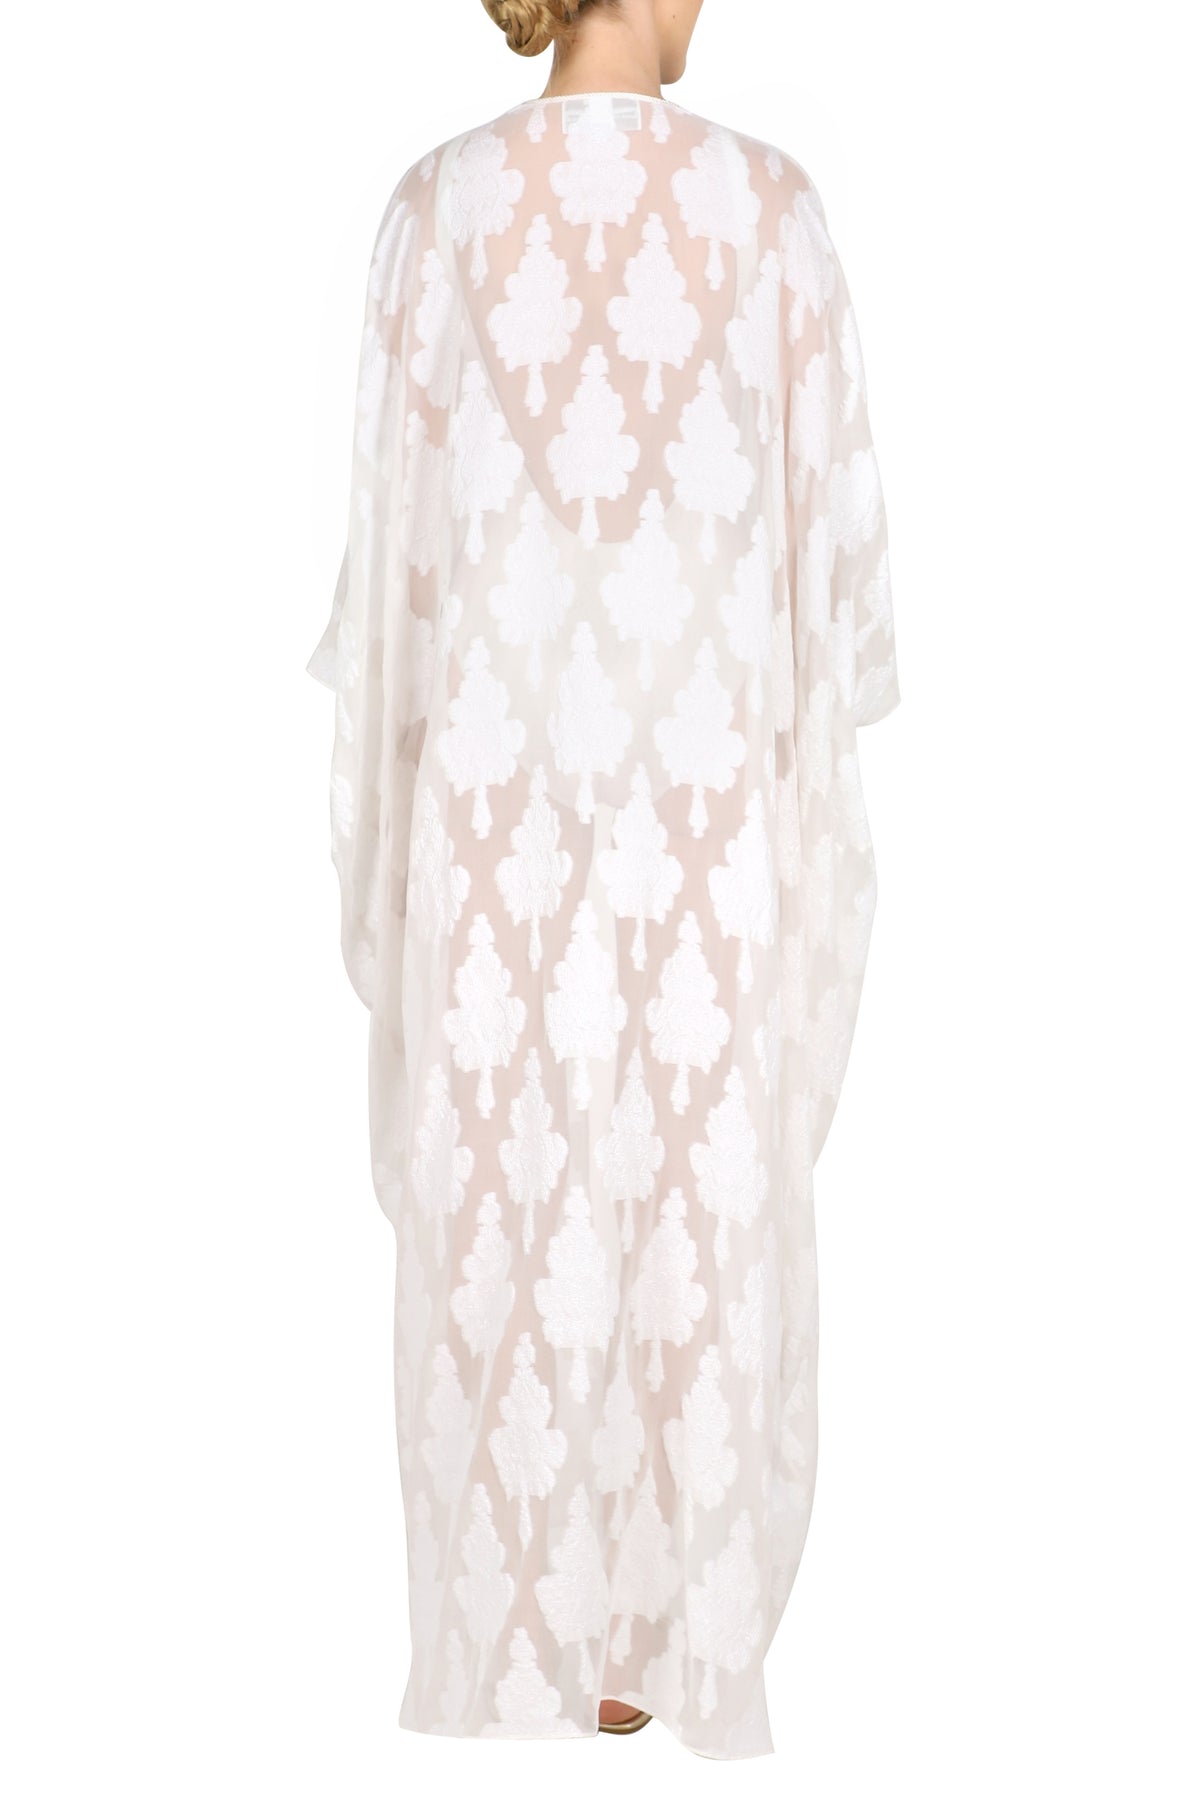 White Motif Cover Up with Tassels